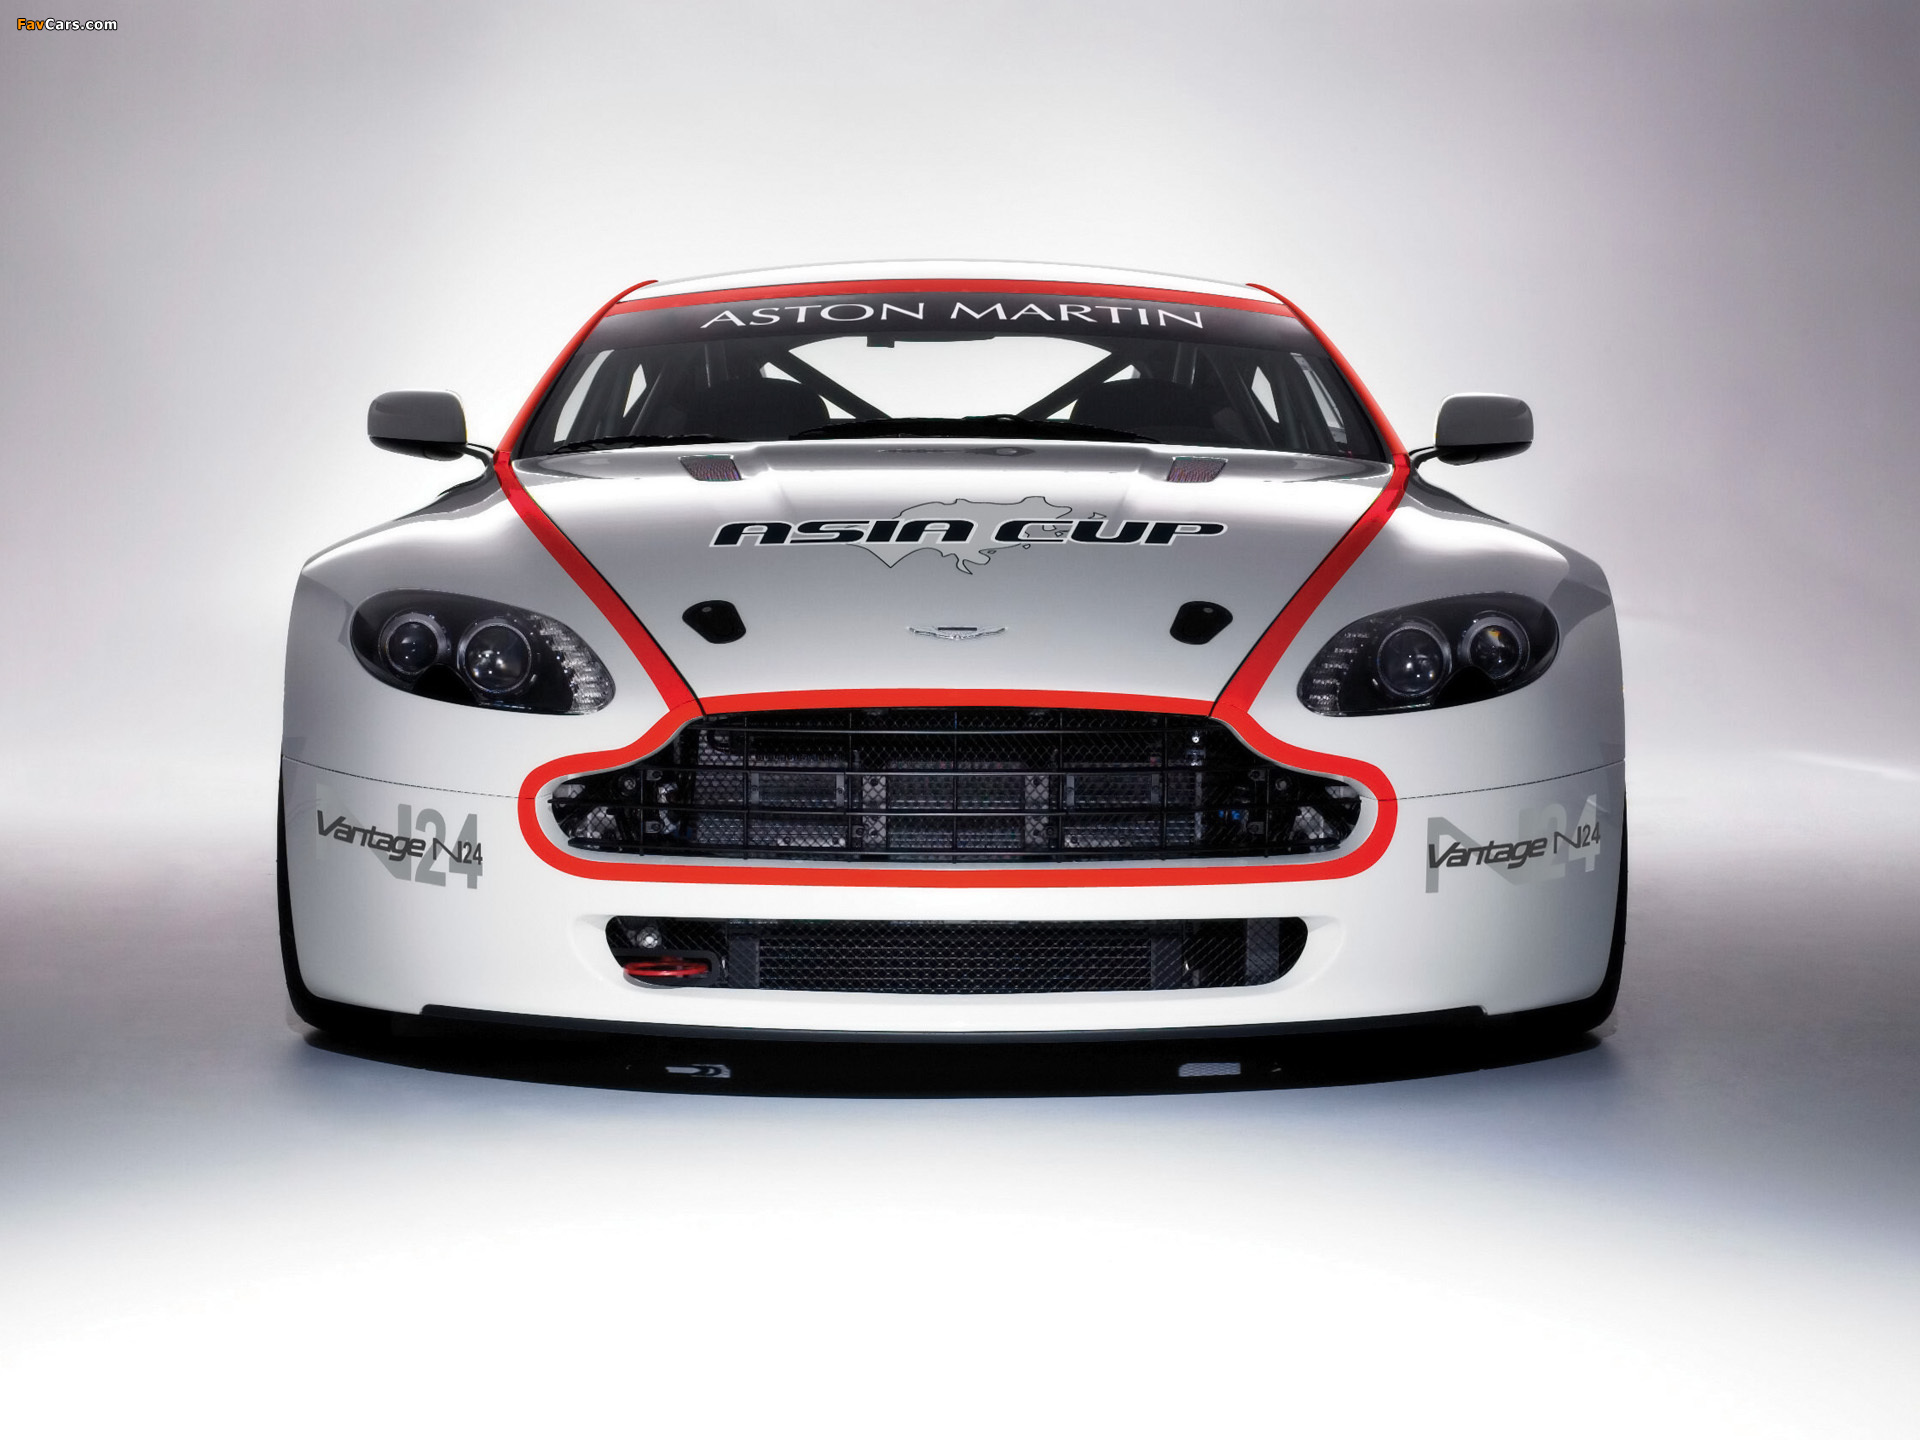 Aston Martin V8 Vantage N24 Asia Cup (2008) wallpapers (1920 x 1440)